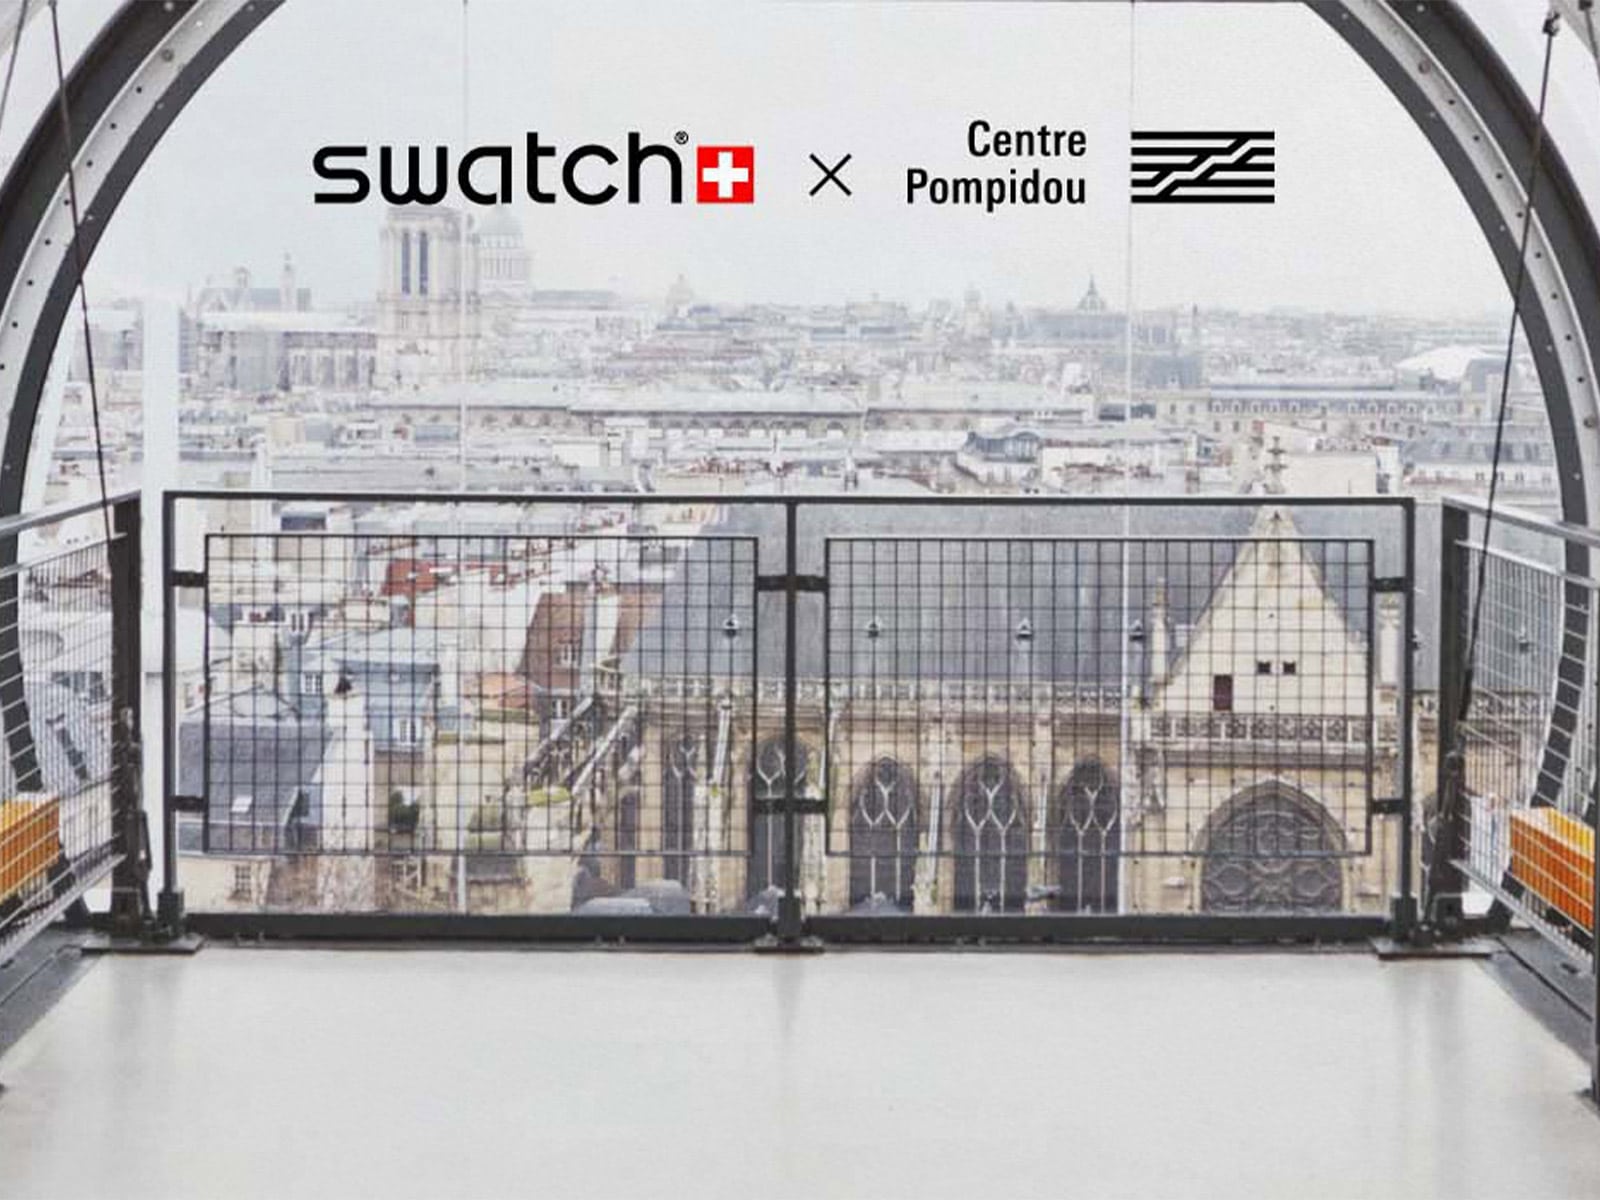 Swatch invades the Centre Pompidou to present its new watch collection